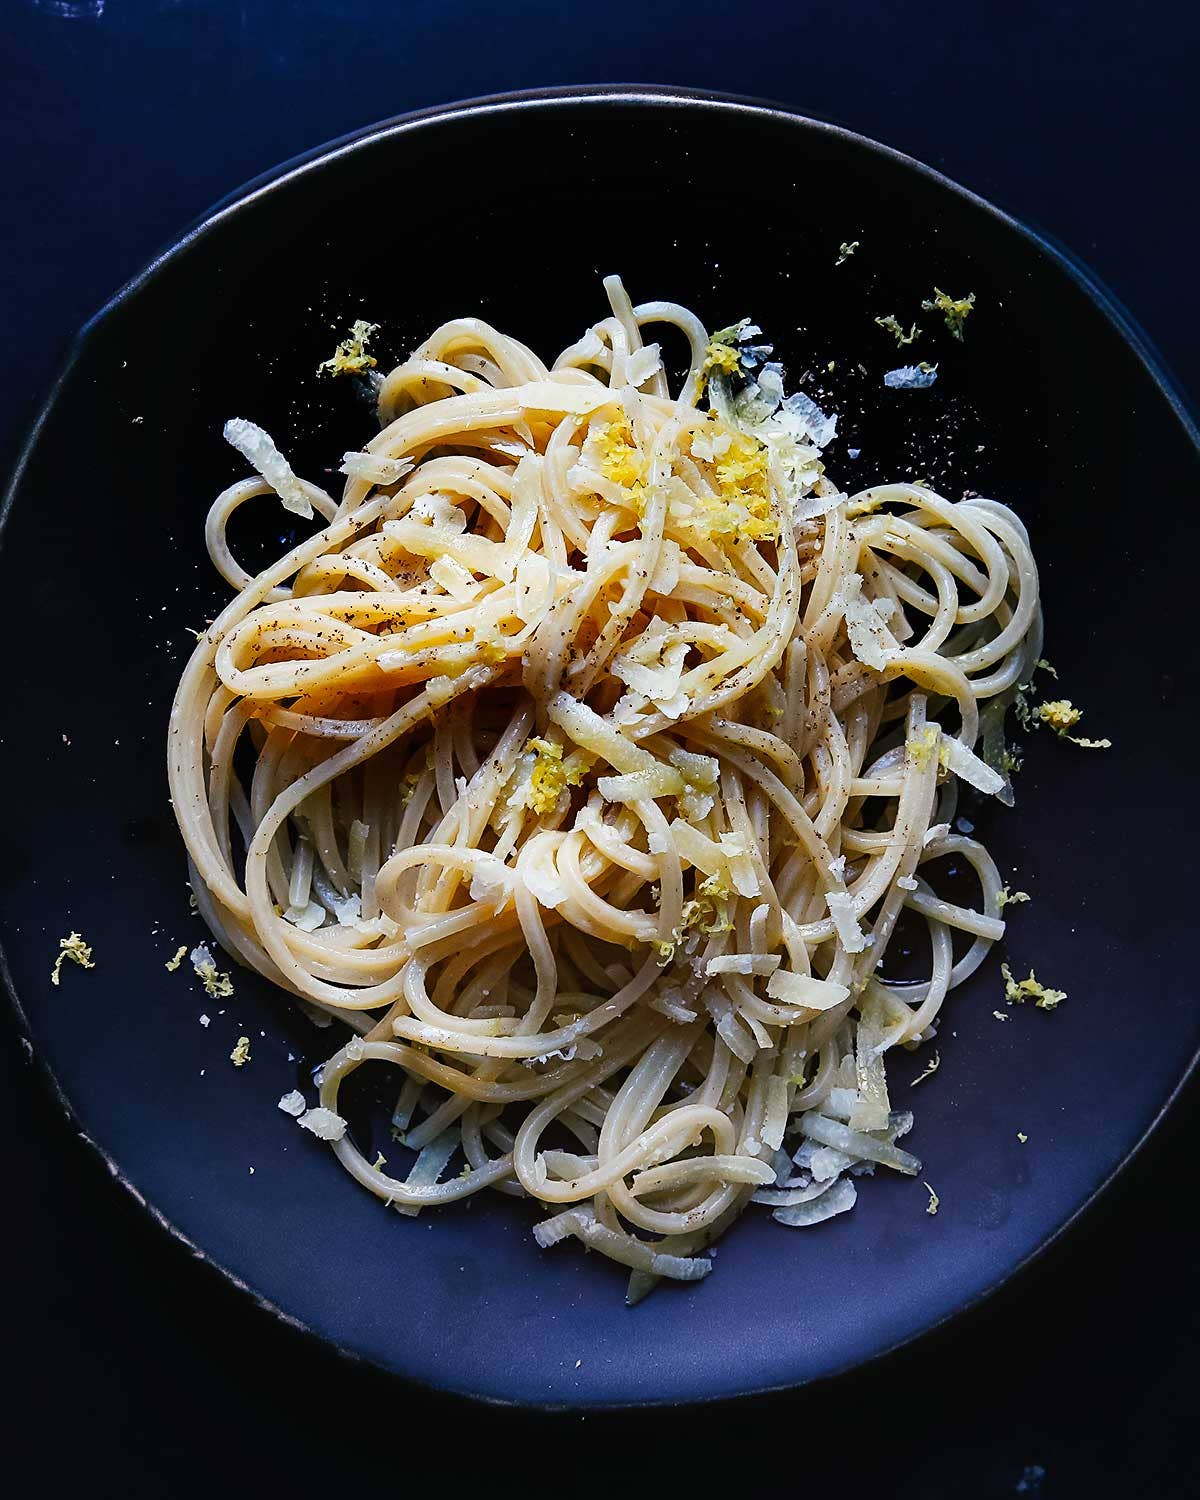 Lemon-Infused Spaghetti with Provolone